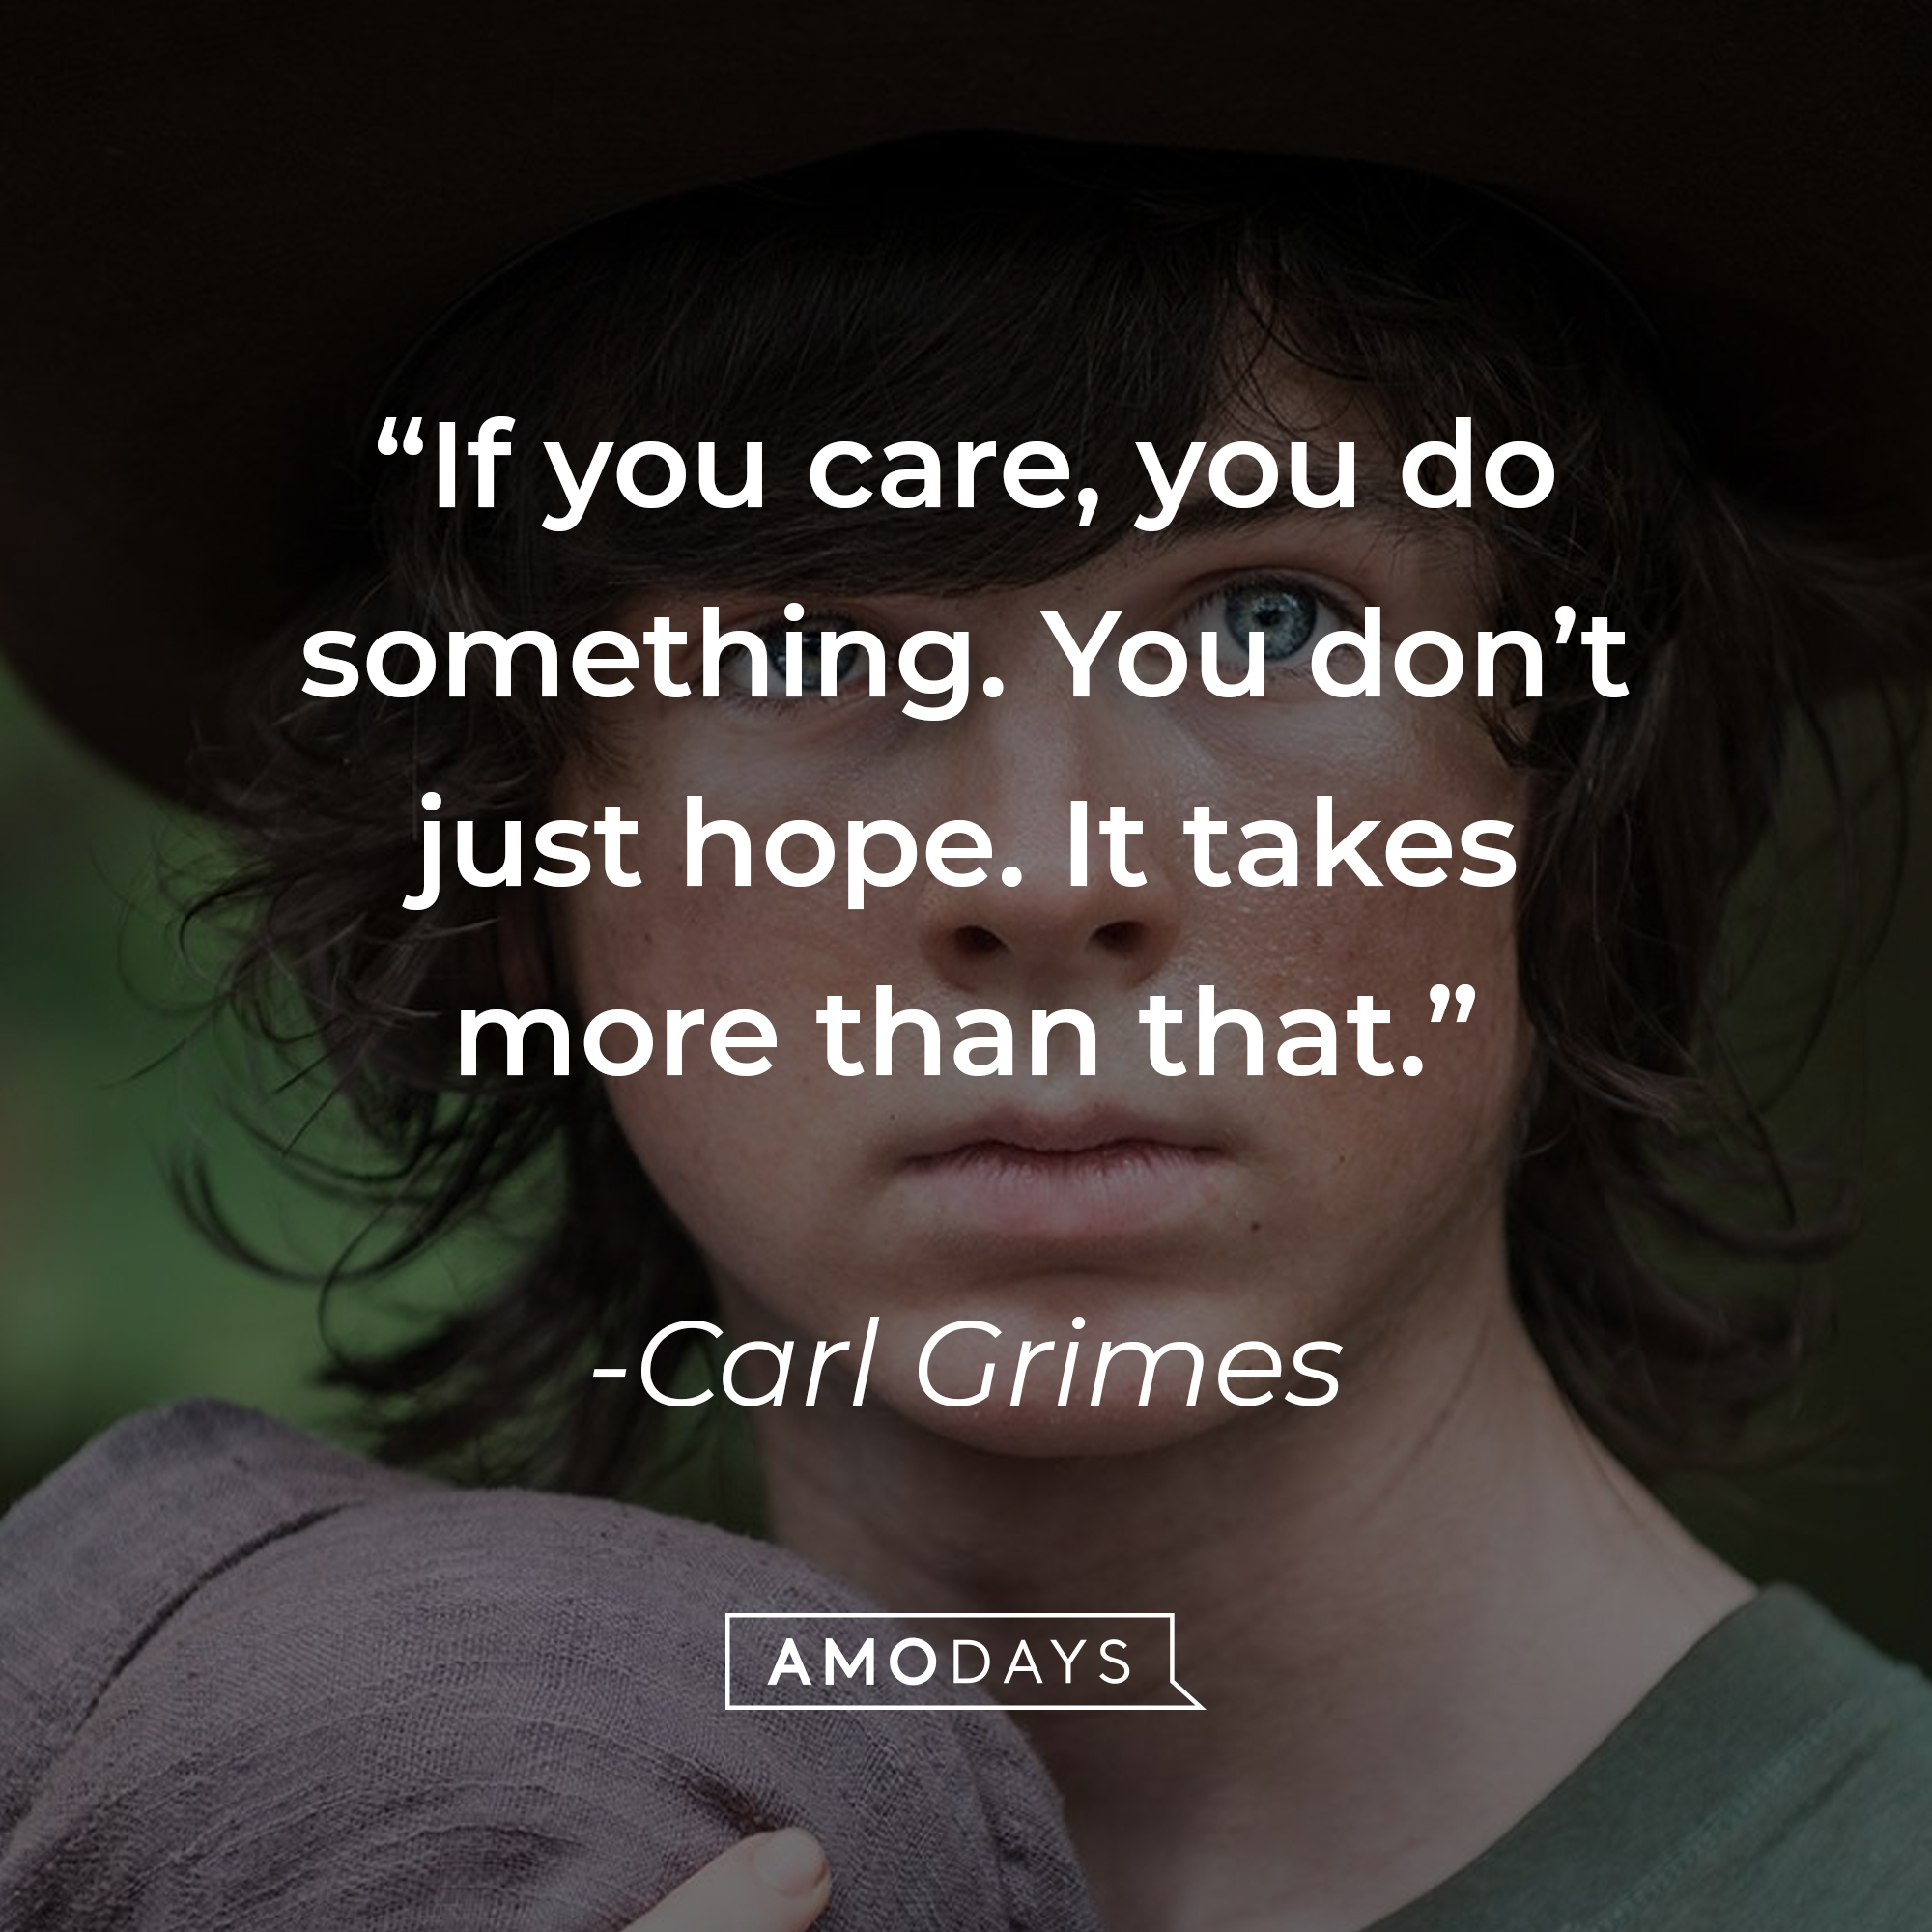 Carl Grimes, with his quote  “If you care, you do something. You don’t just hope. It takes more than that.” | Source: facebook.com/TheWalkingDeadAMC